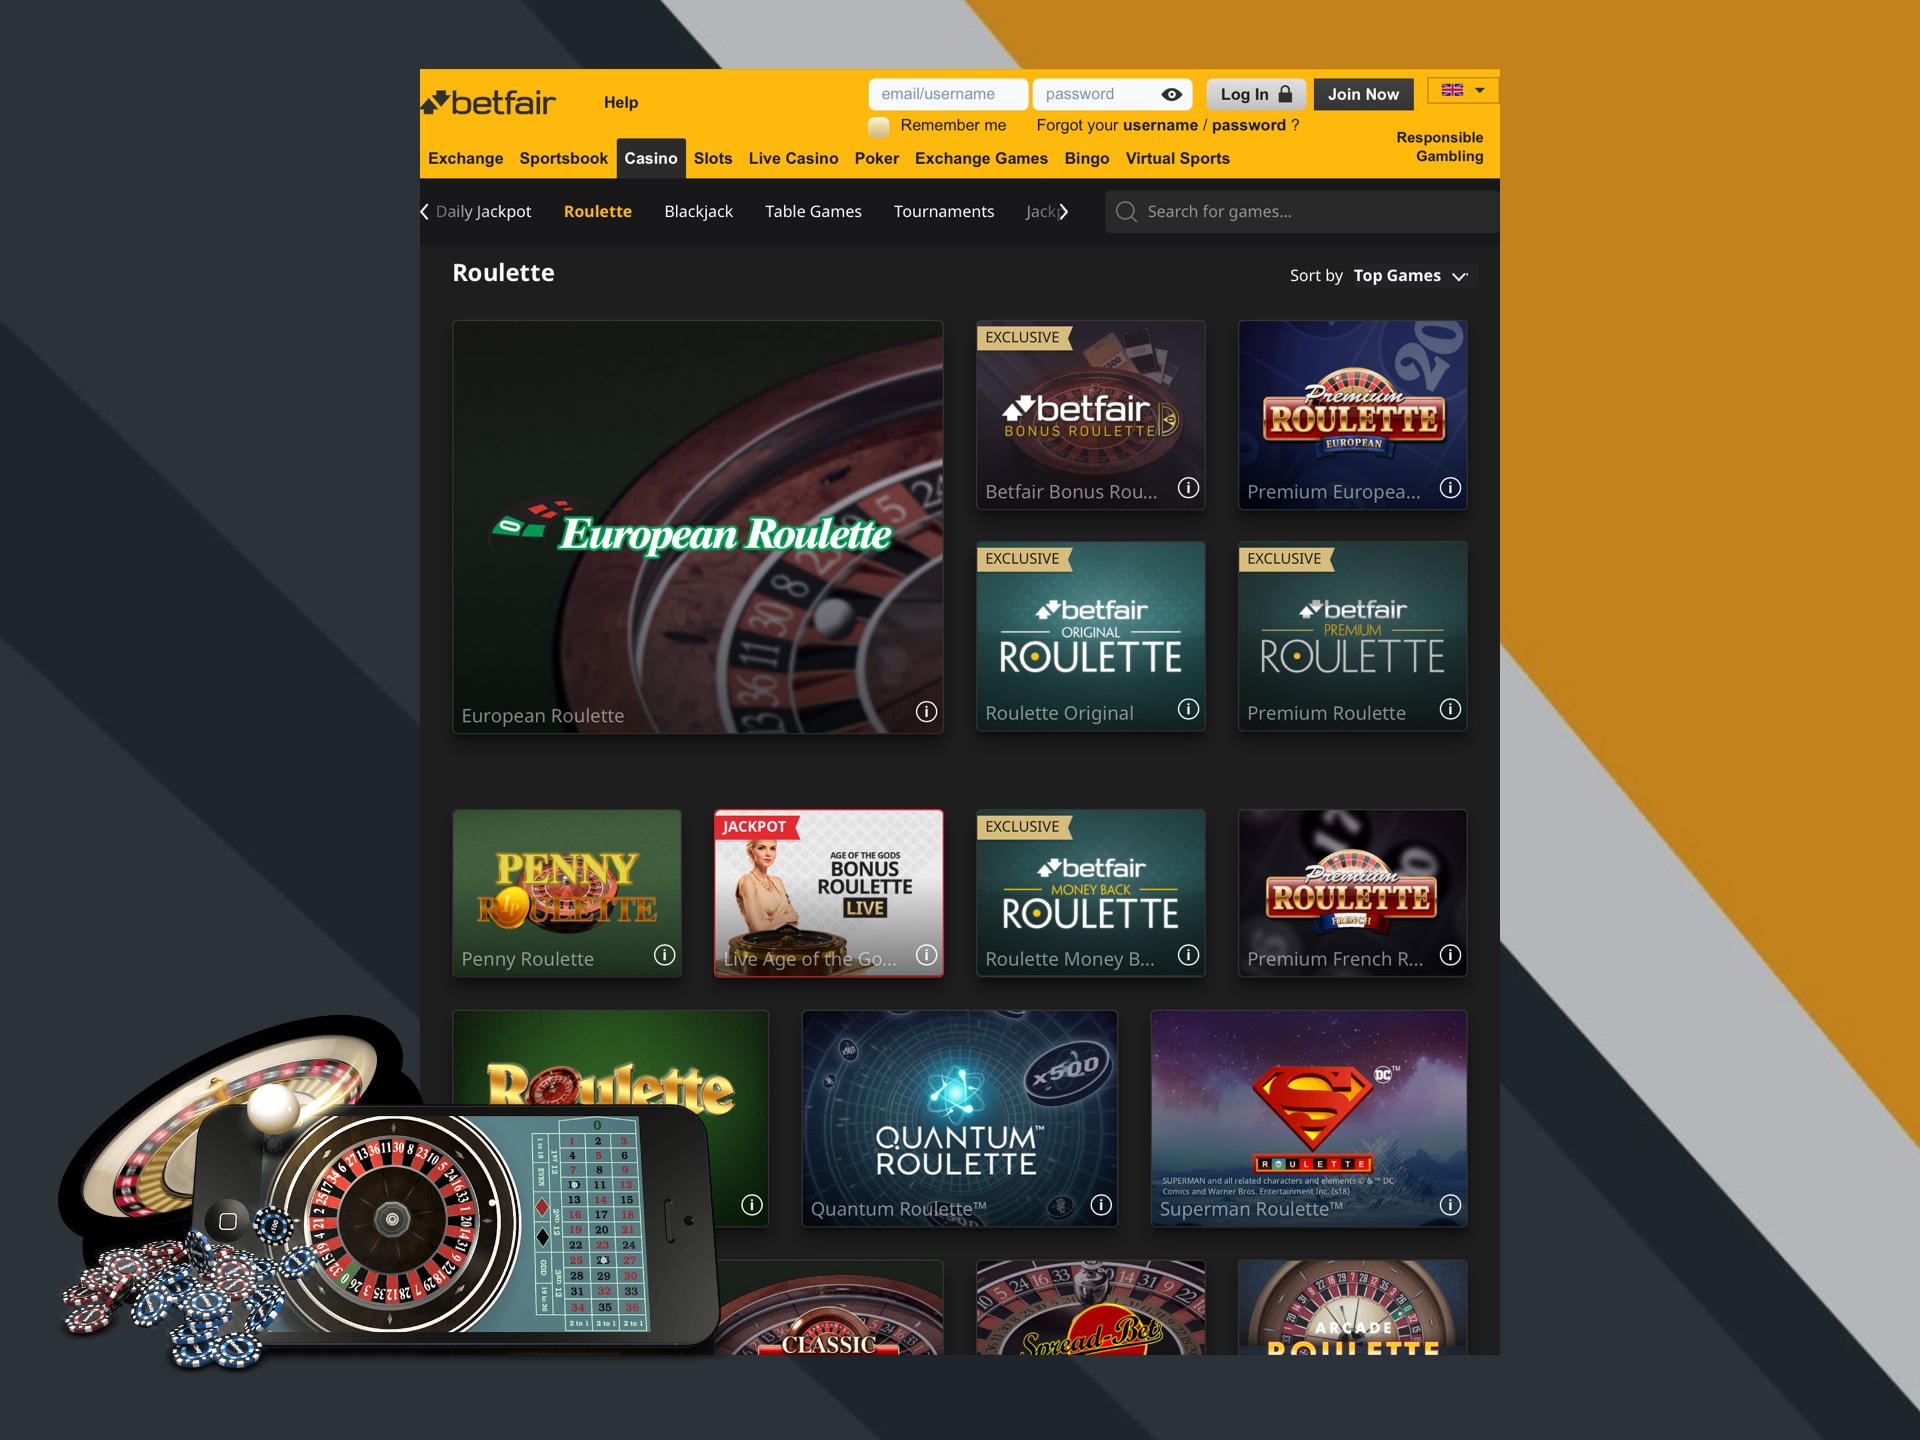 Play any kind of an online roulette at Betfair Casino.